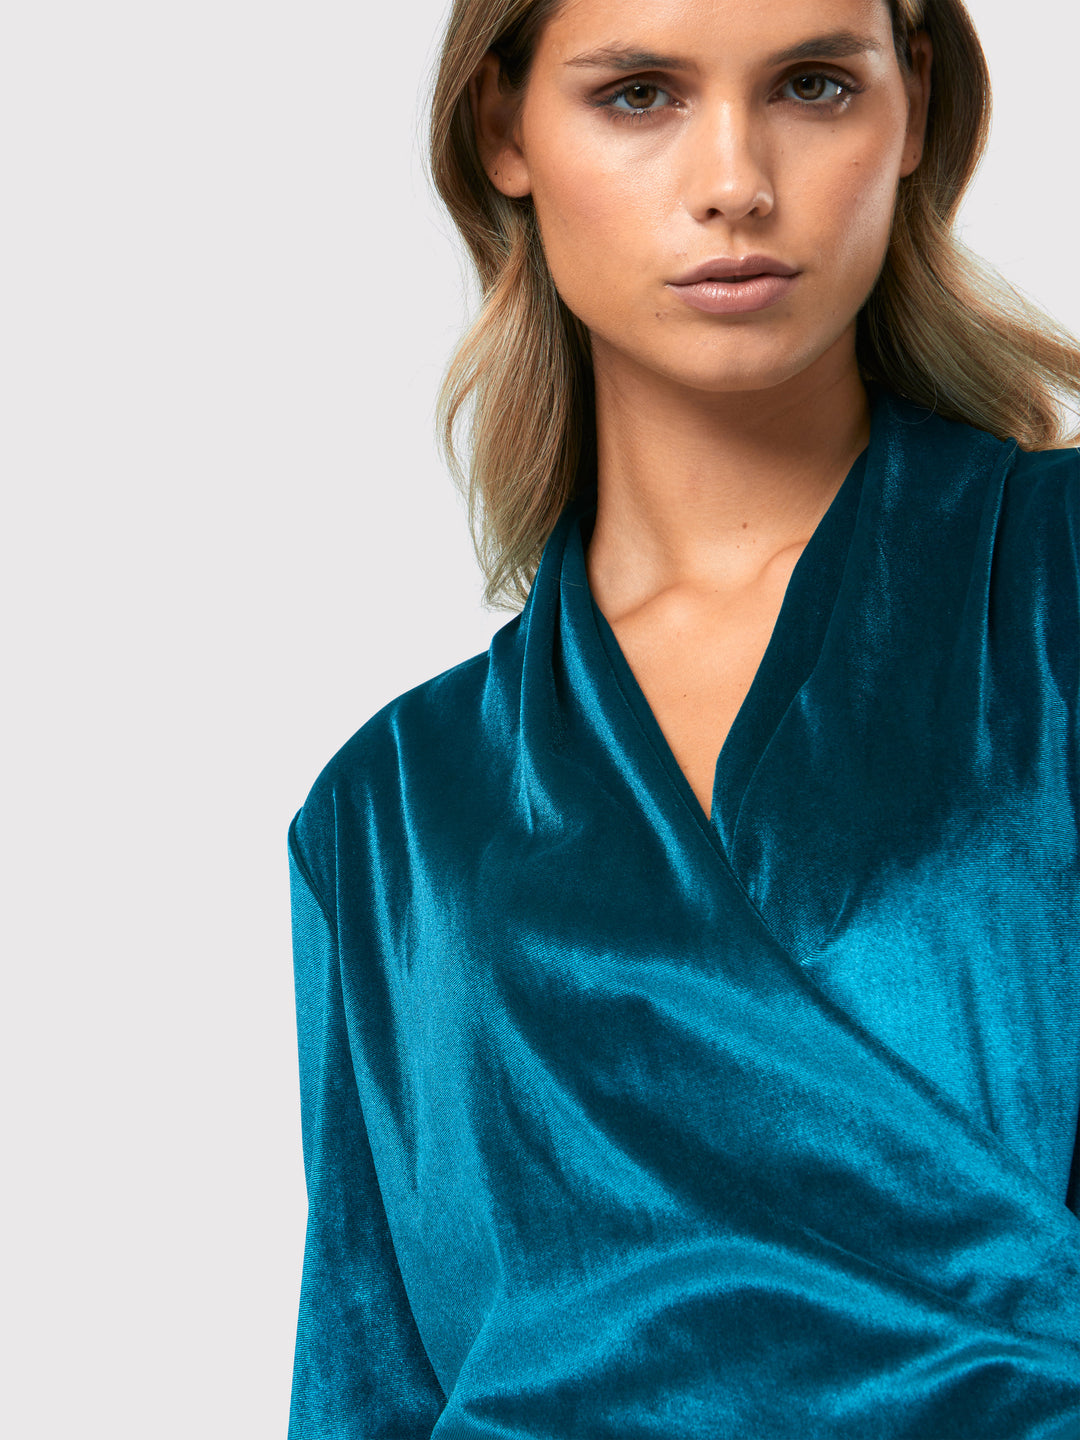 Introducing the Roxanne Petrol Top, an updated version of the beloved best-selling faux-wrap top. This stunning top showcases a sleek silhouette with a gracefully draped v-neckline, creating an air of elegance. Crafted from luxurious stretch velvet in a rich teal tone, it emanates sophistication and allure. The hip-length cut and full-length sleeves offer both comfort and style. Elevate your fashion game with the Roxanne Petrol Top, the epitome of refined chic and a statement piece for any occasion.